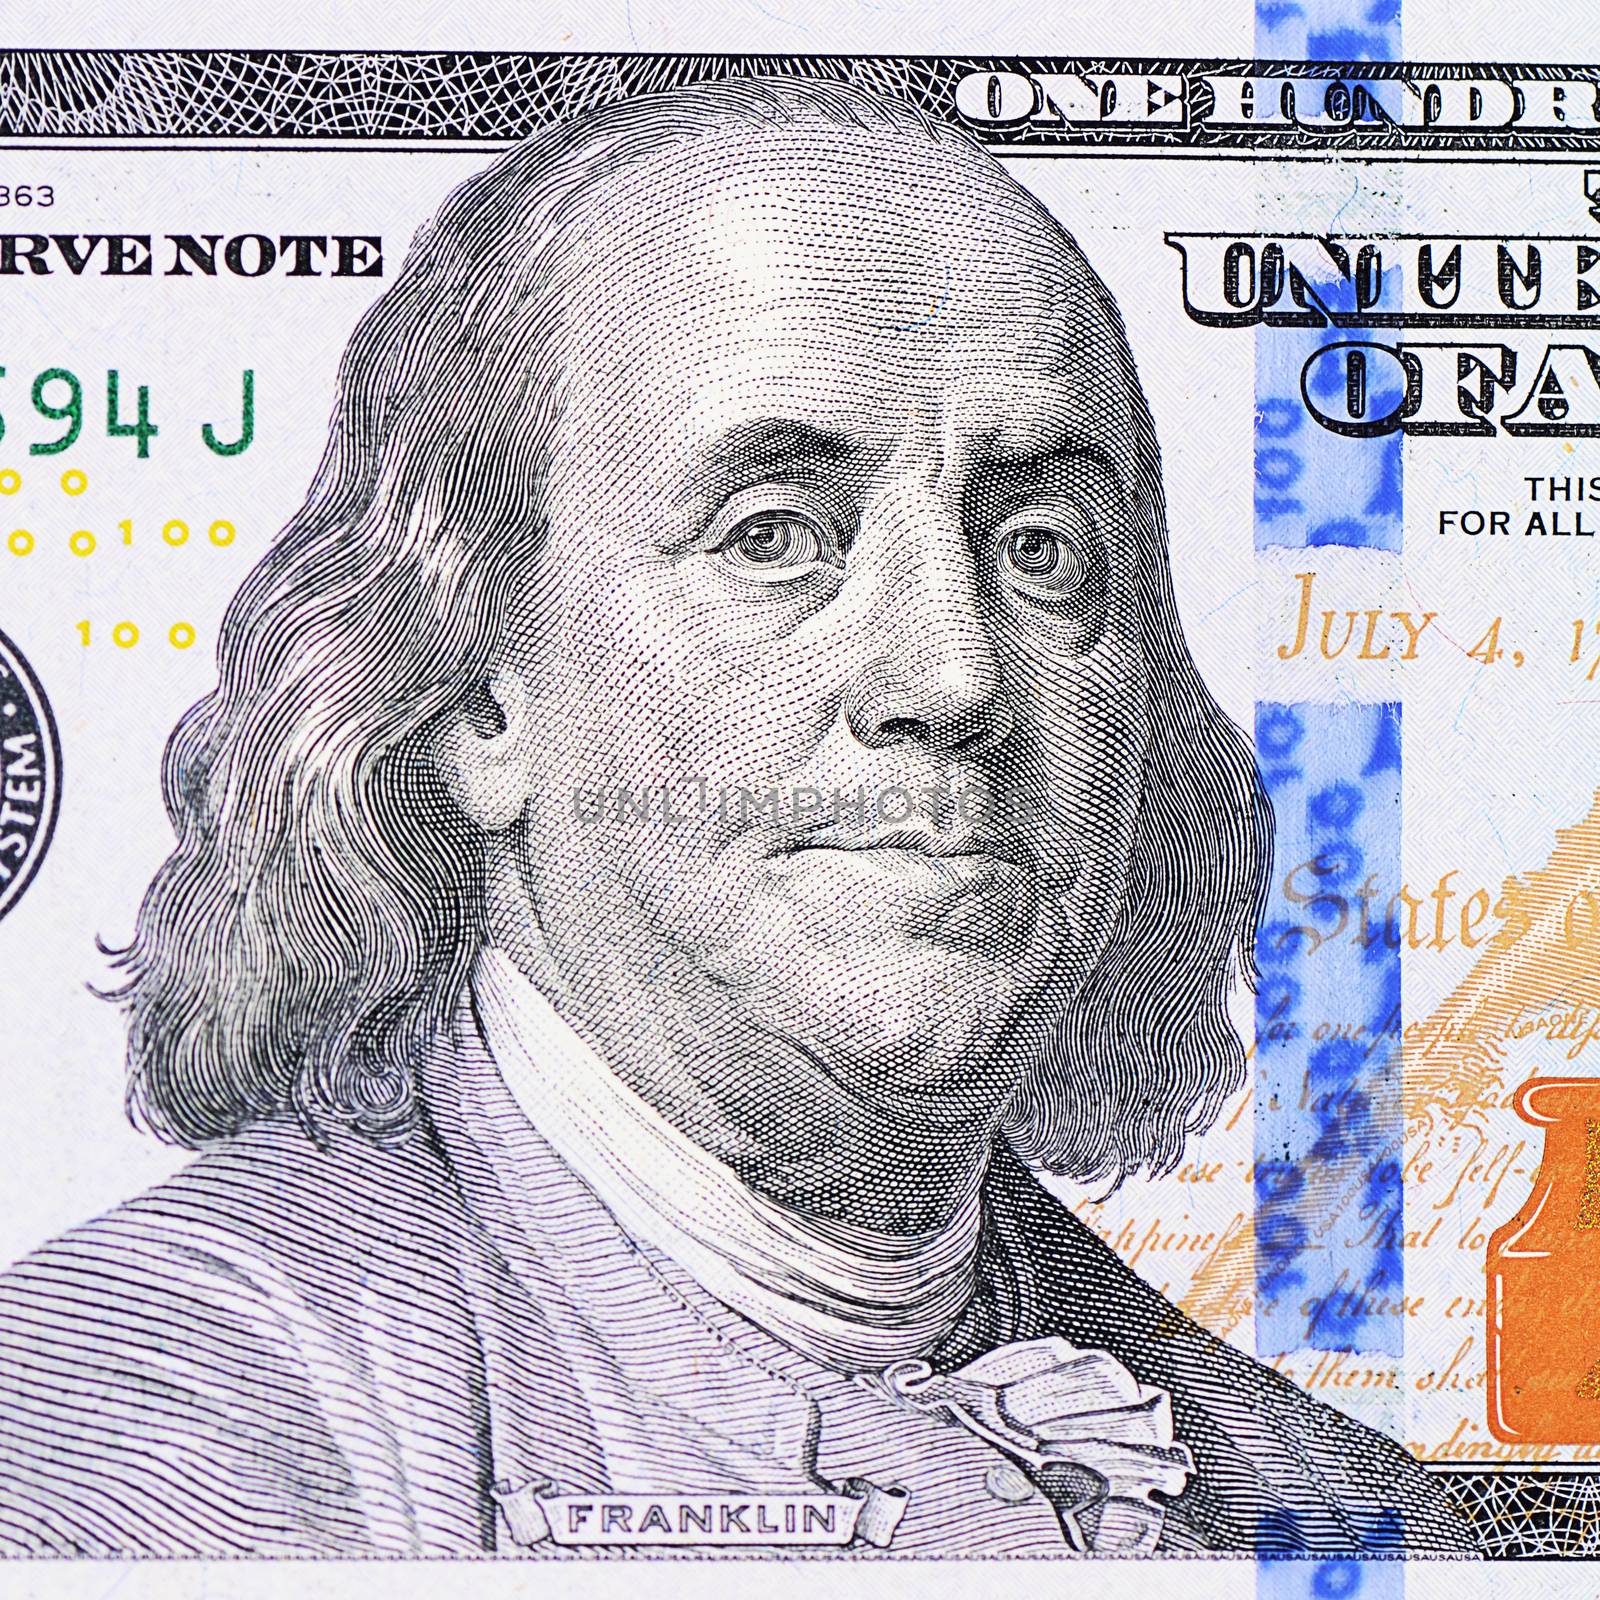 The face of Franklin the dollar bill